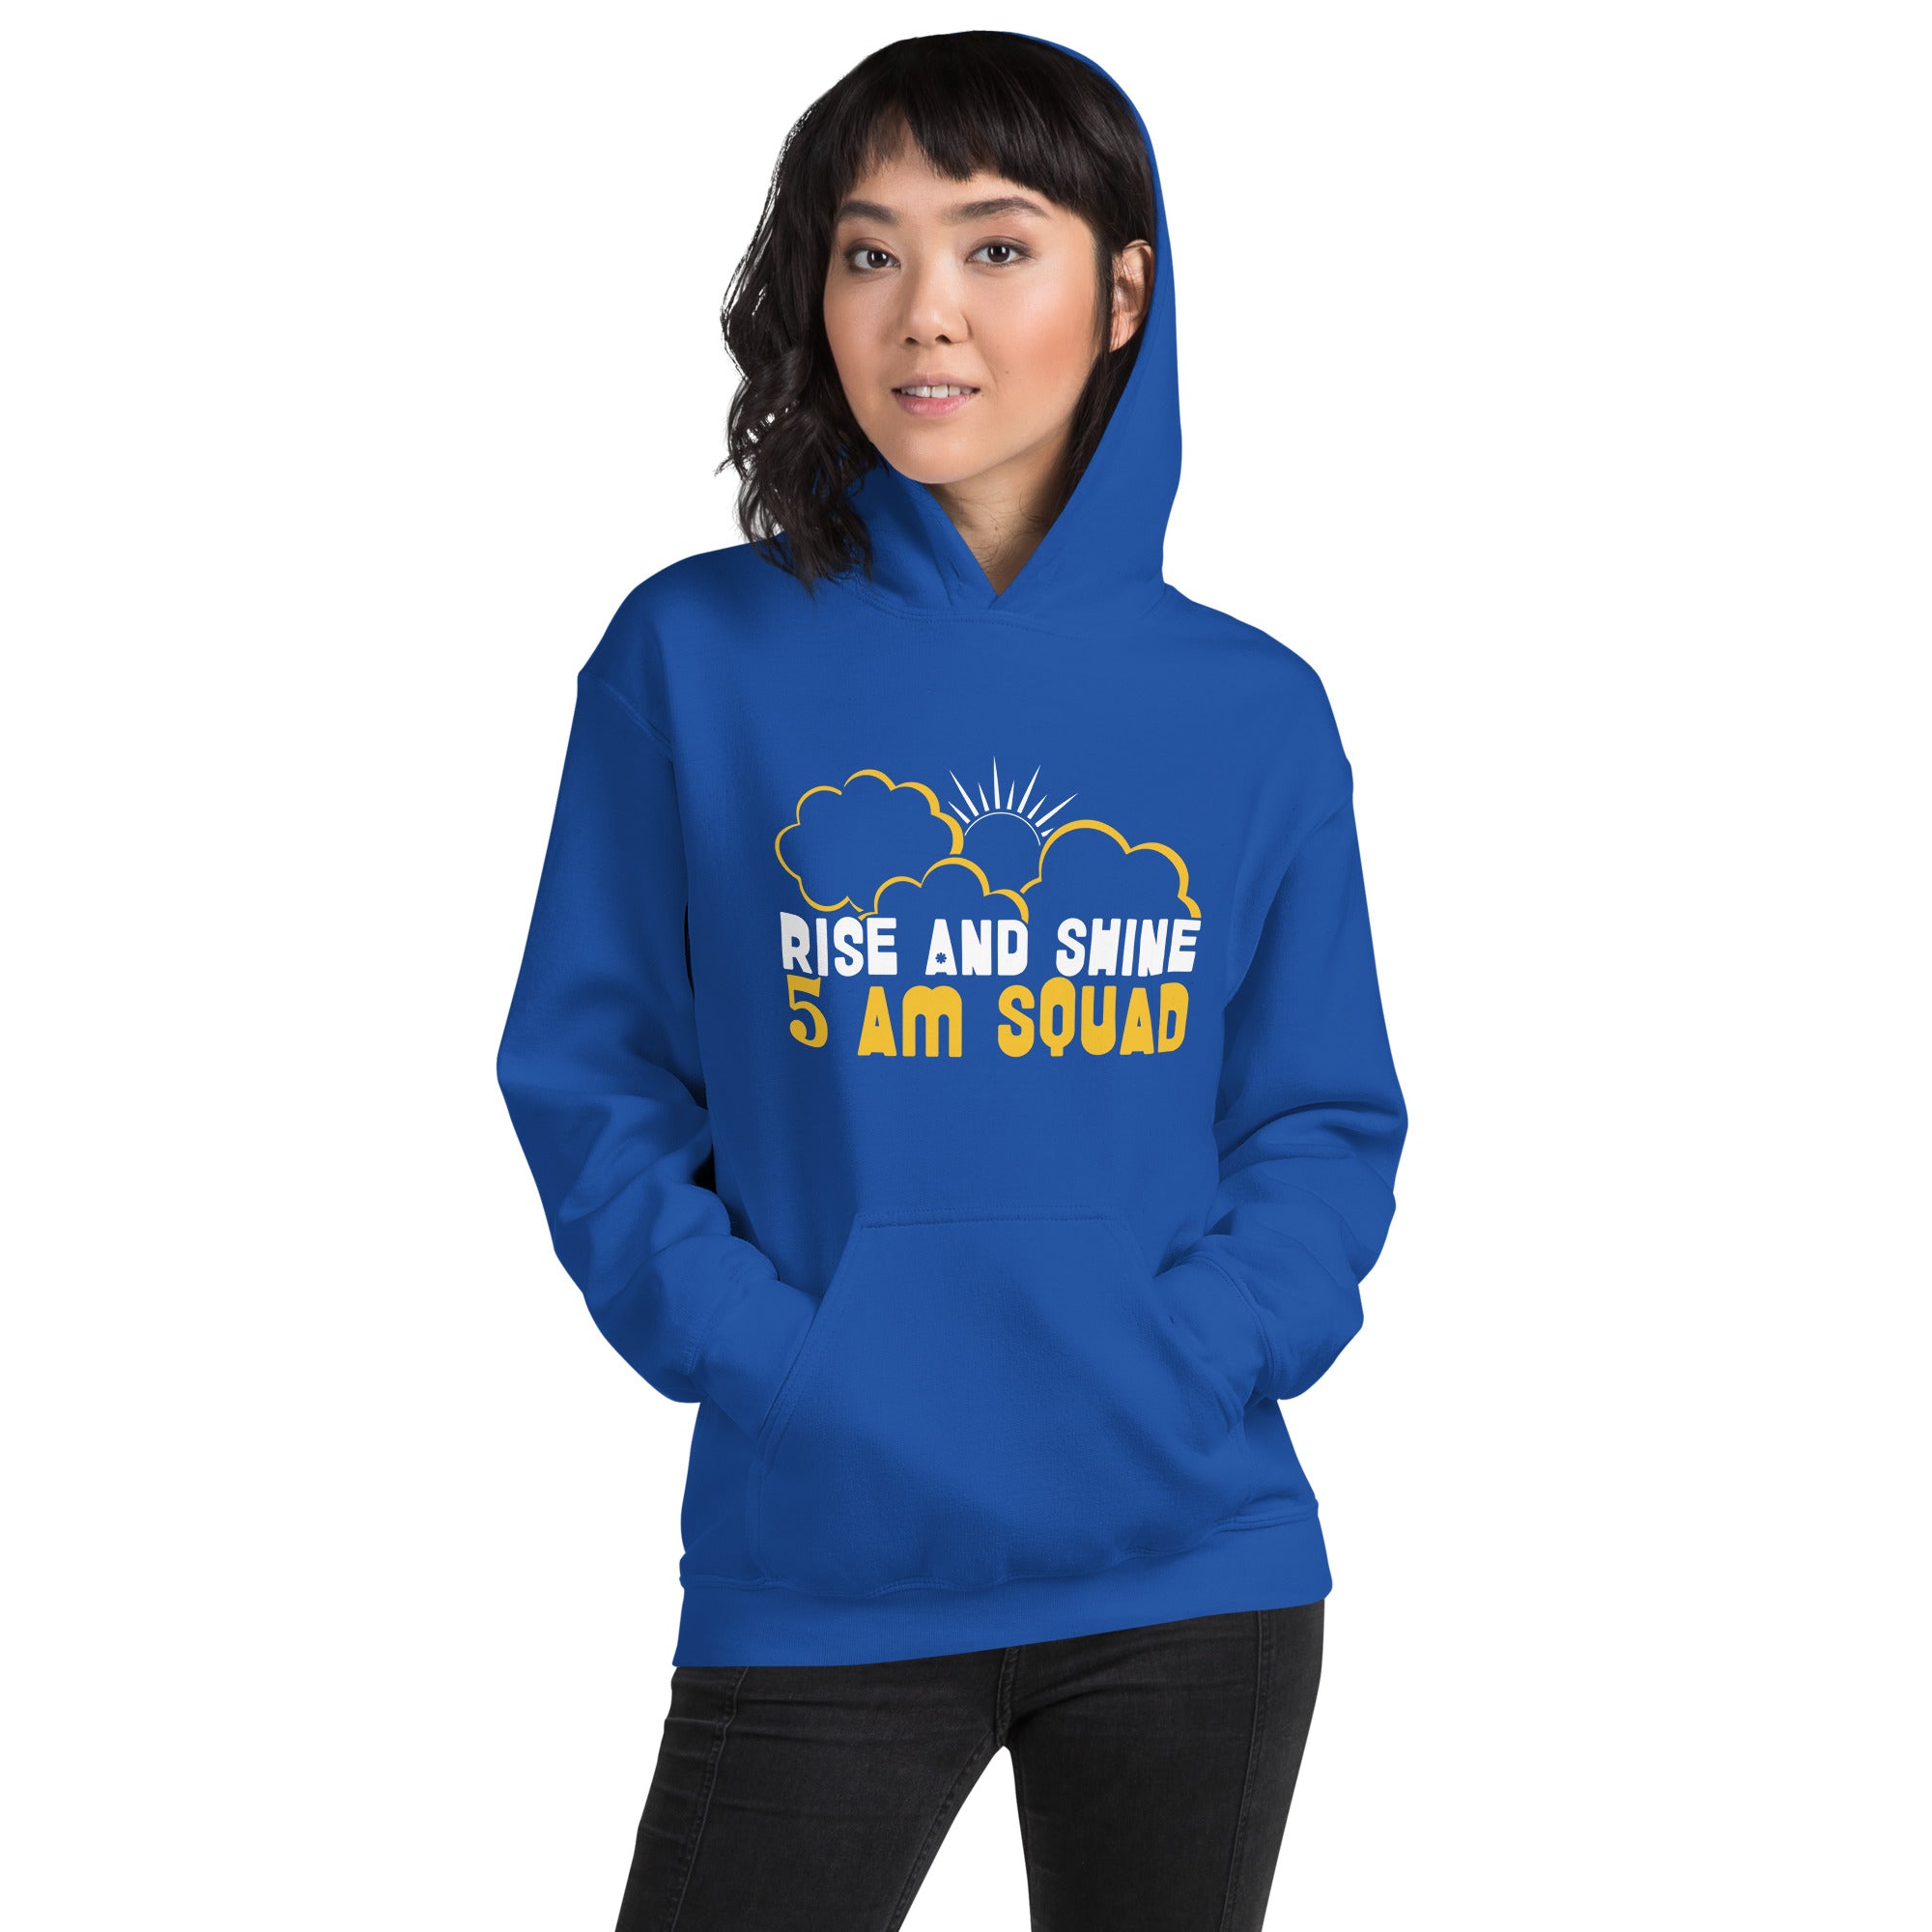 Rise And Shine 5 Am Squad Gym Fitness Training Workout Exercise Crossfit 5 Am Squad Women's Hoodie